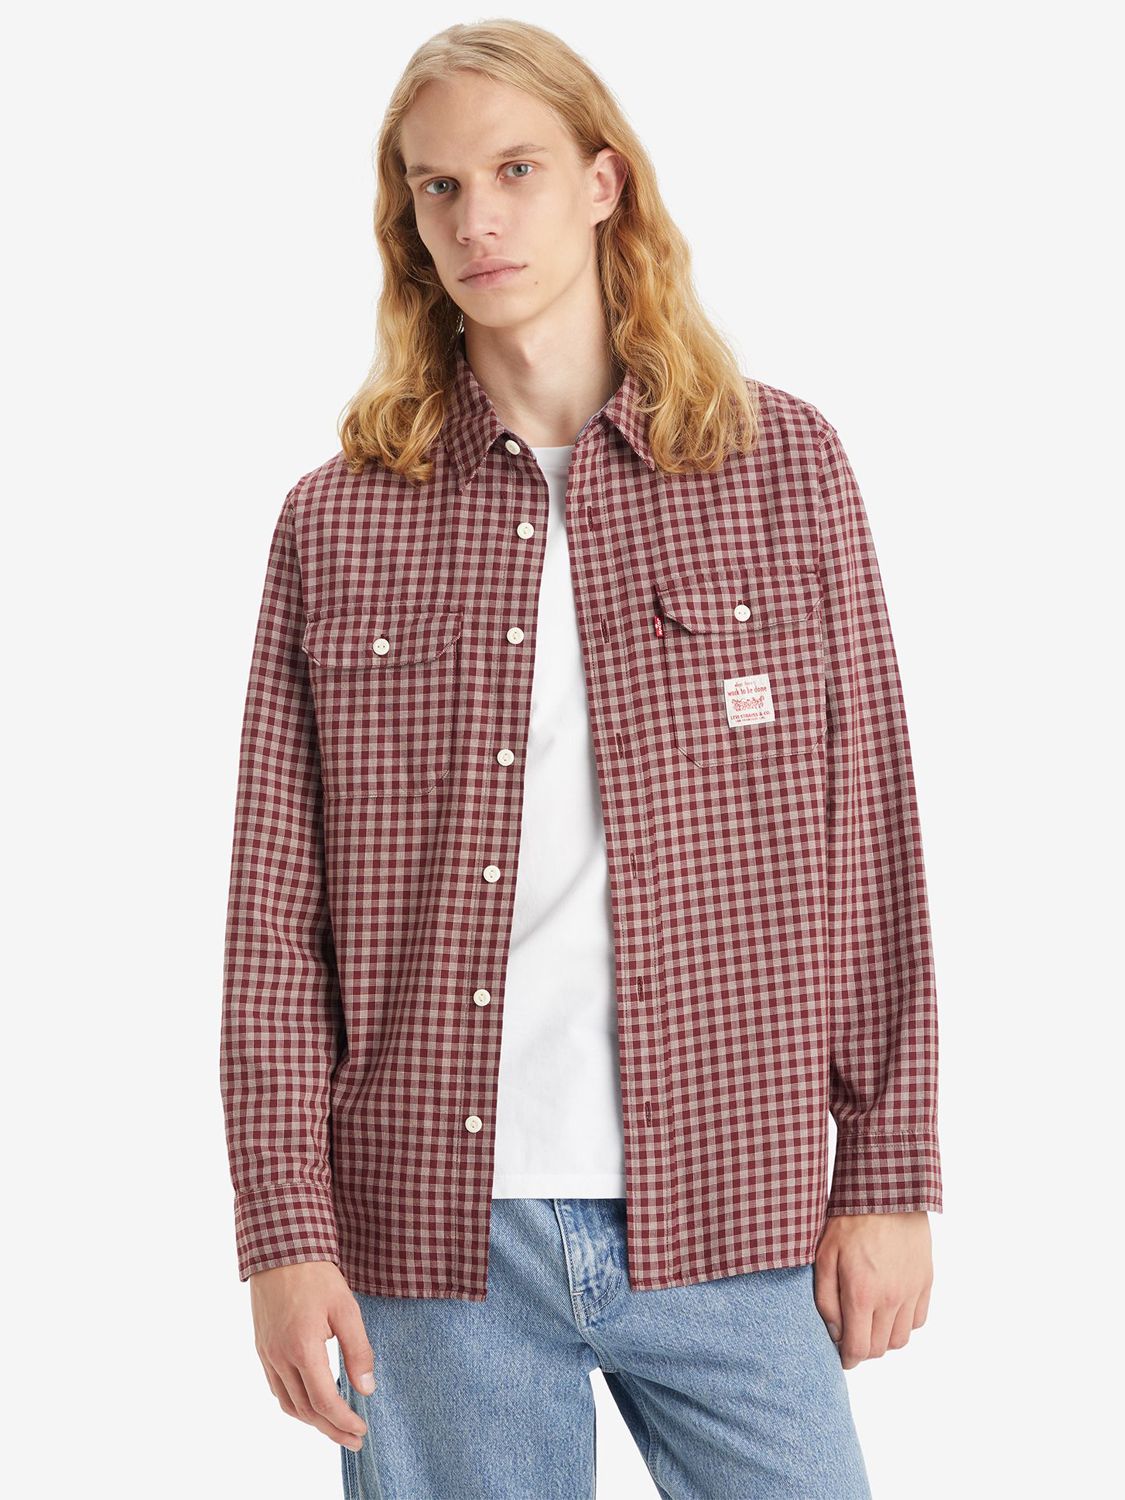 Levi's Classic Checked Worker Shirt, Red/Multi, M